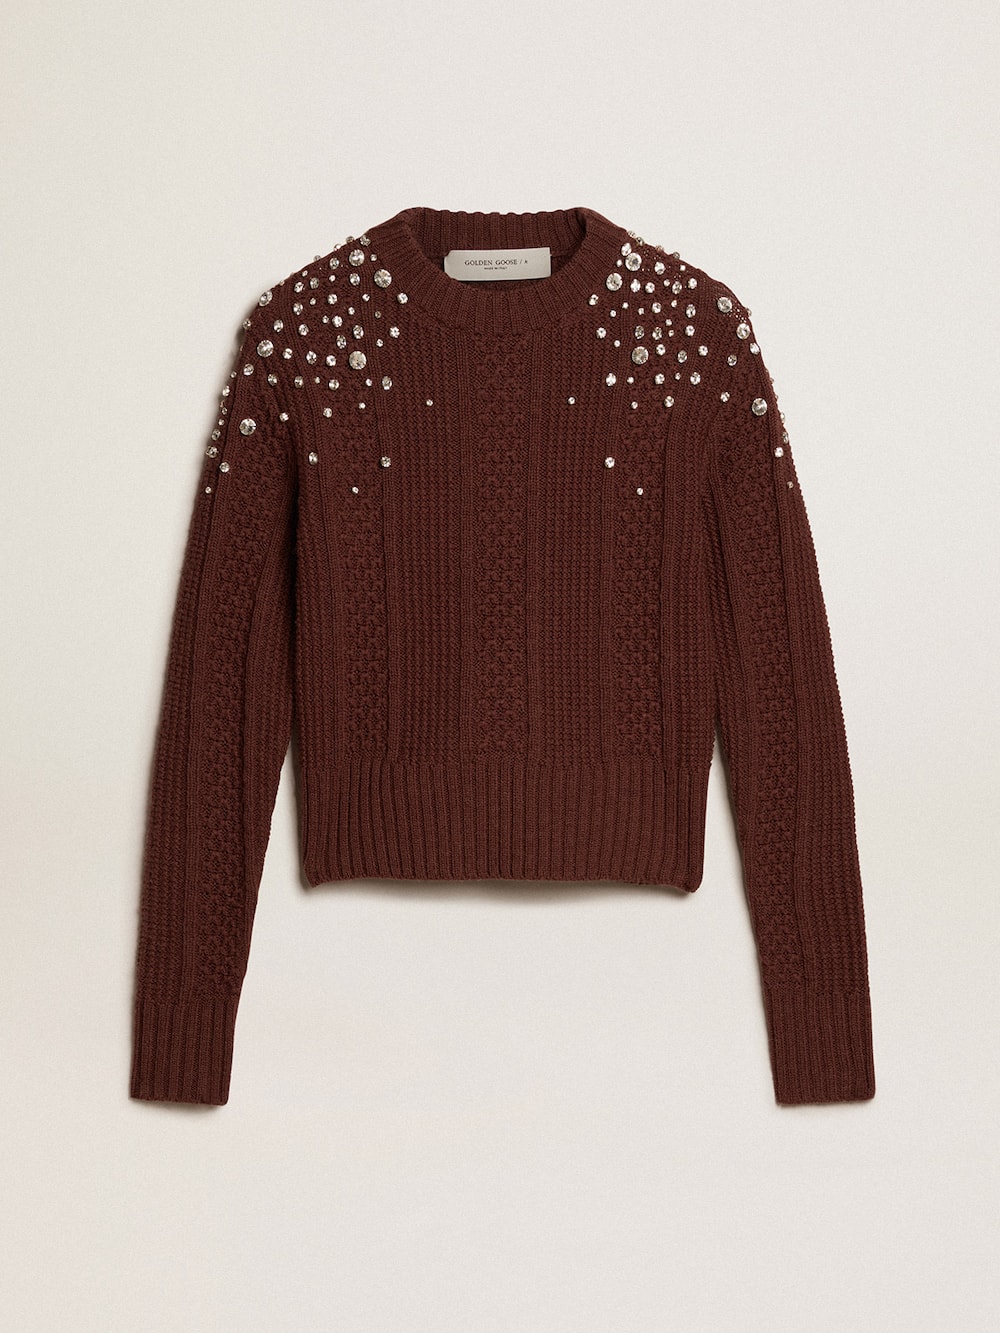 Golden Goose - Cropped sweater in burgundy wool with crystals  in 